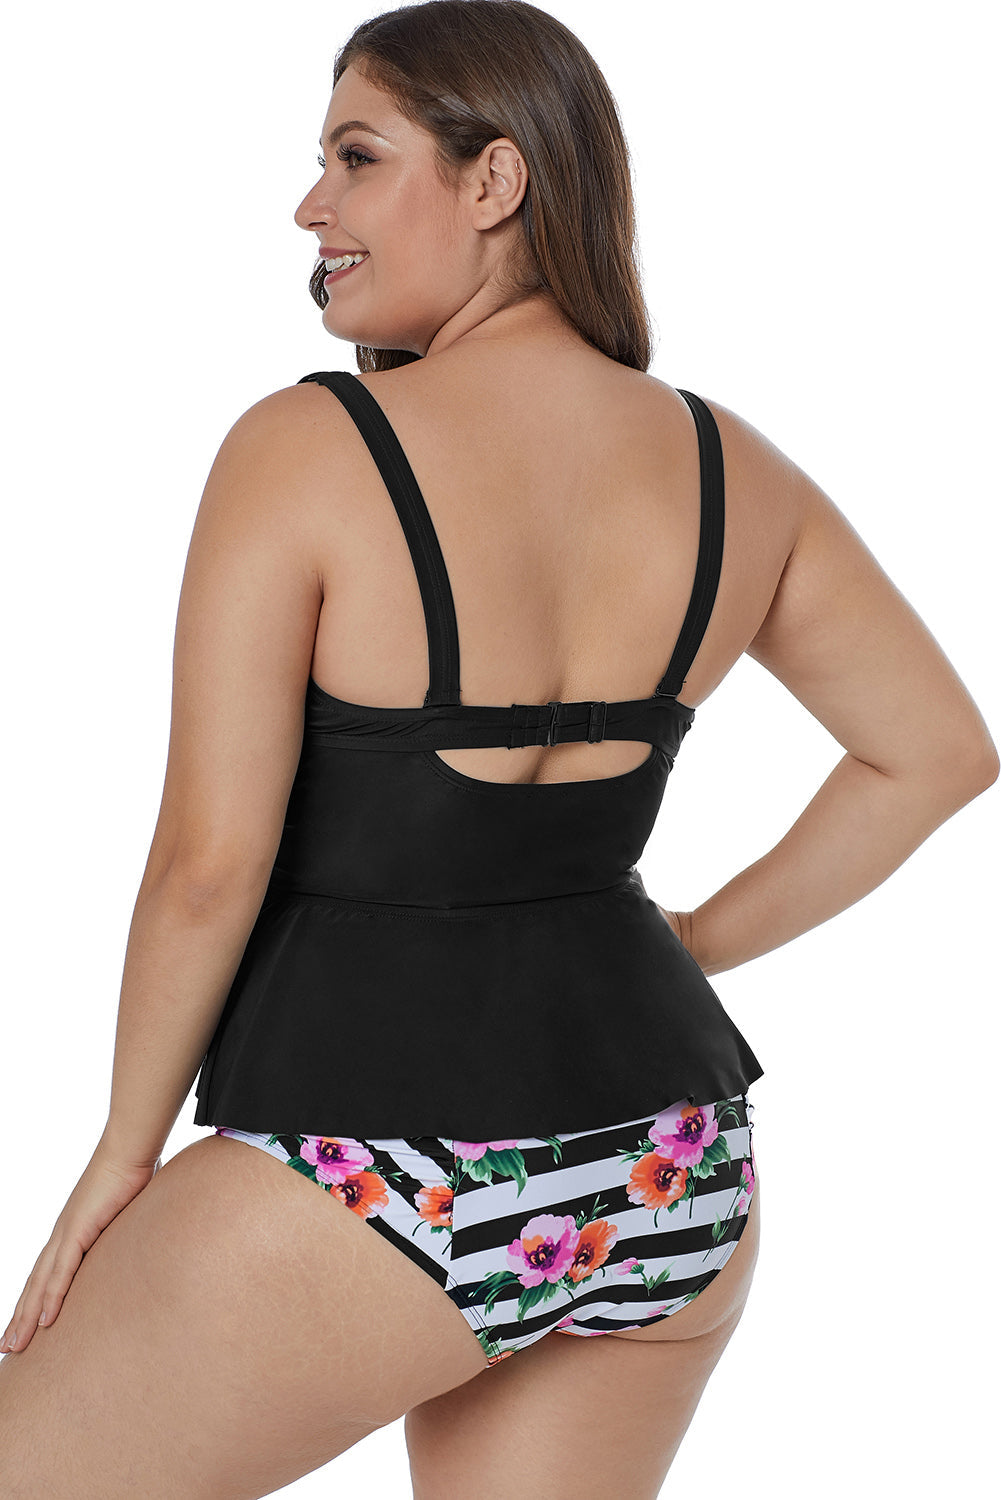 Plus Size Ruffled Tankini With Floral Panty